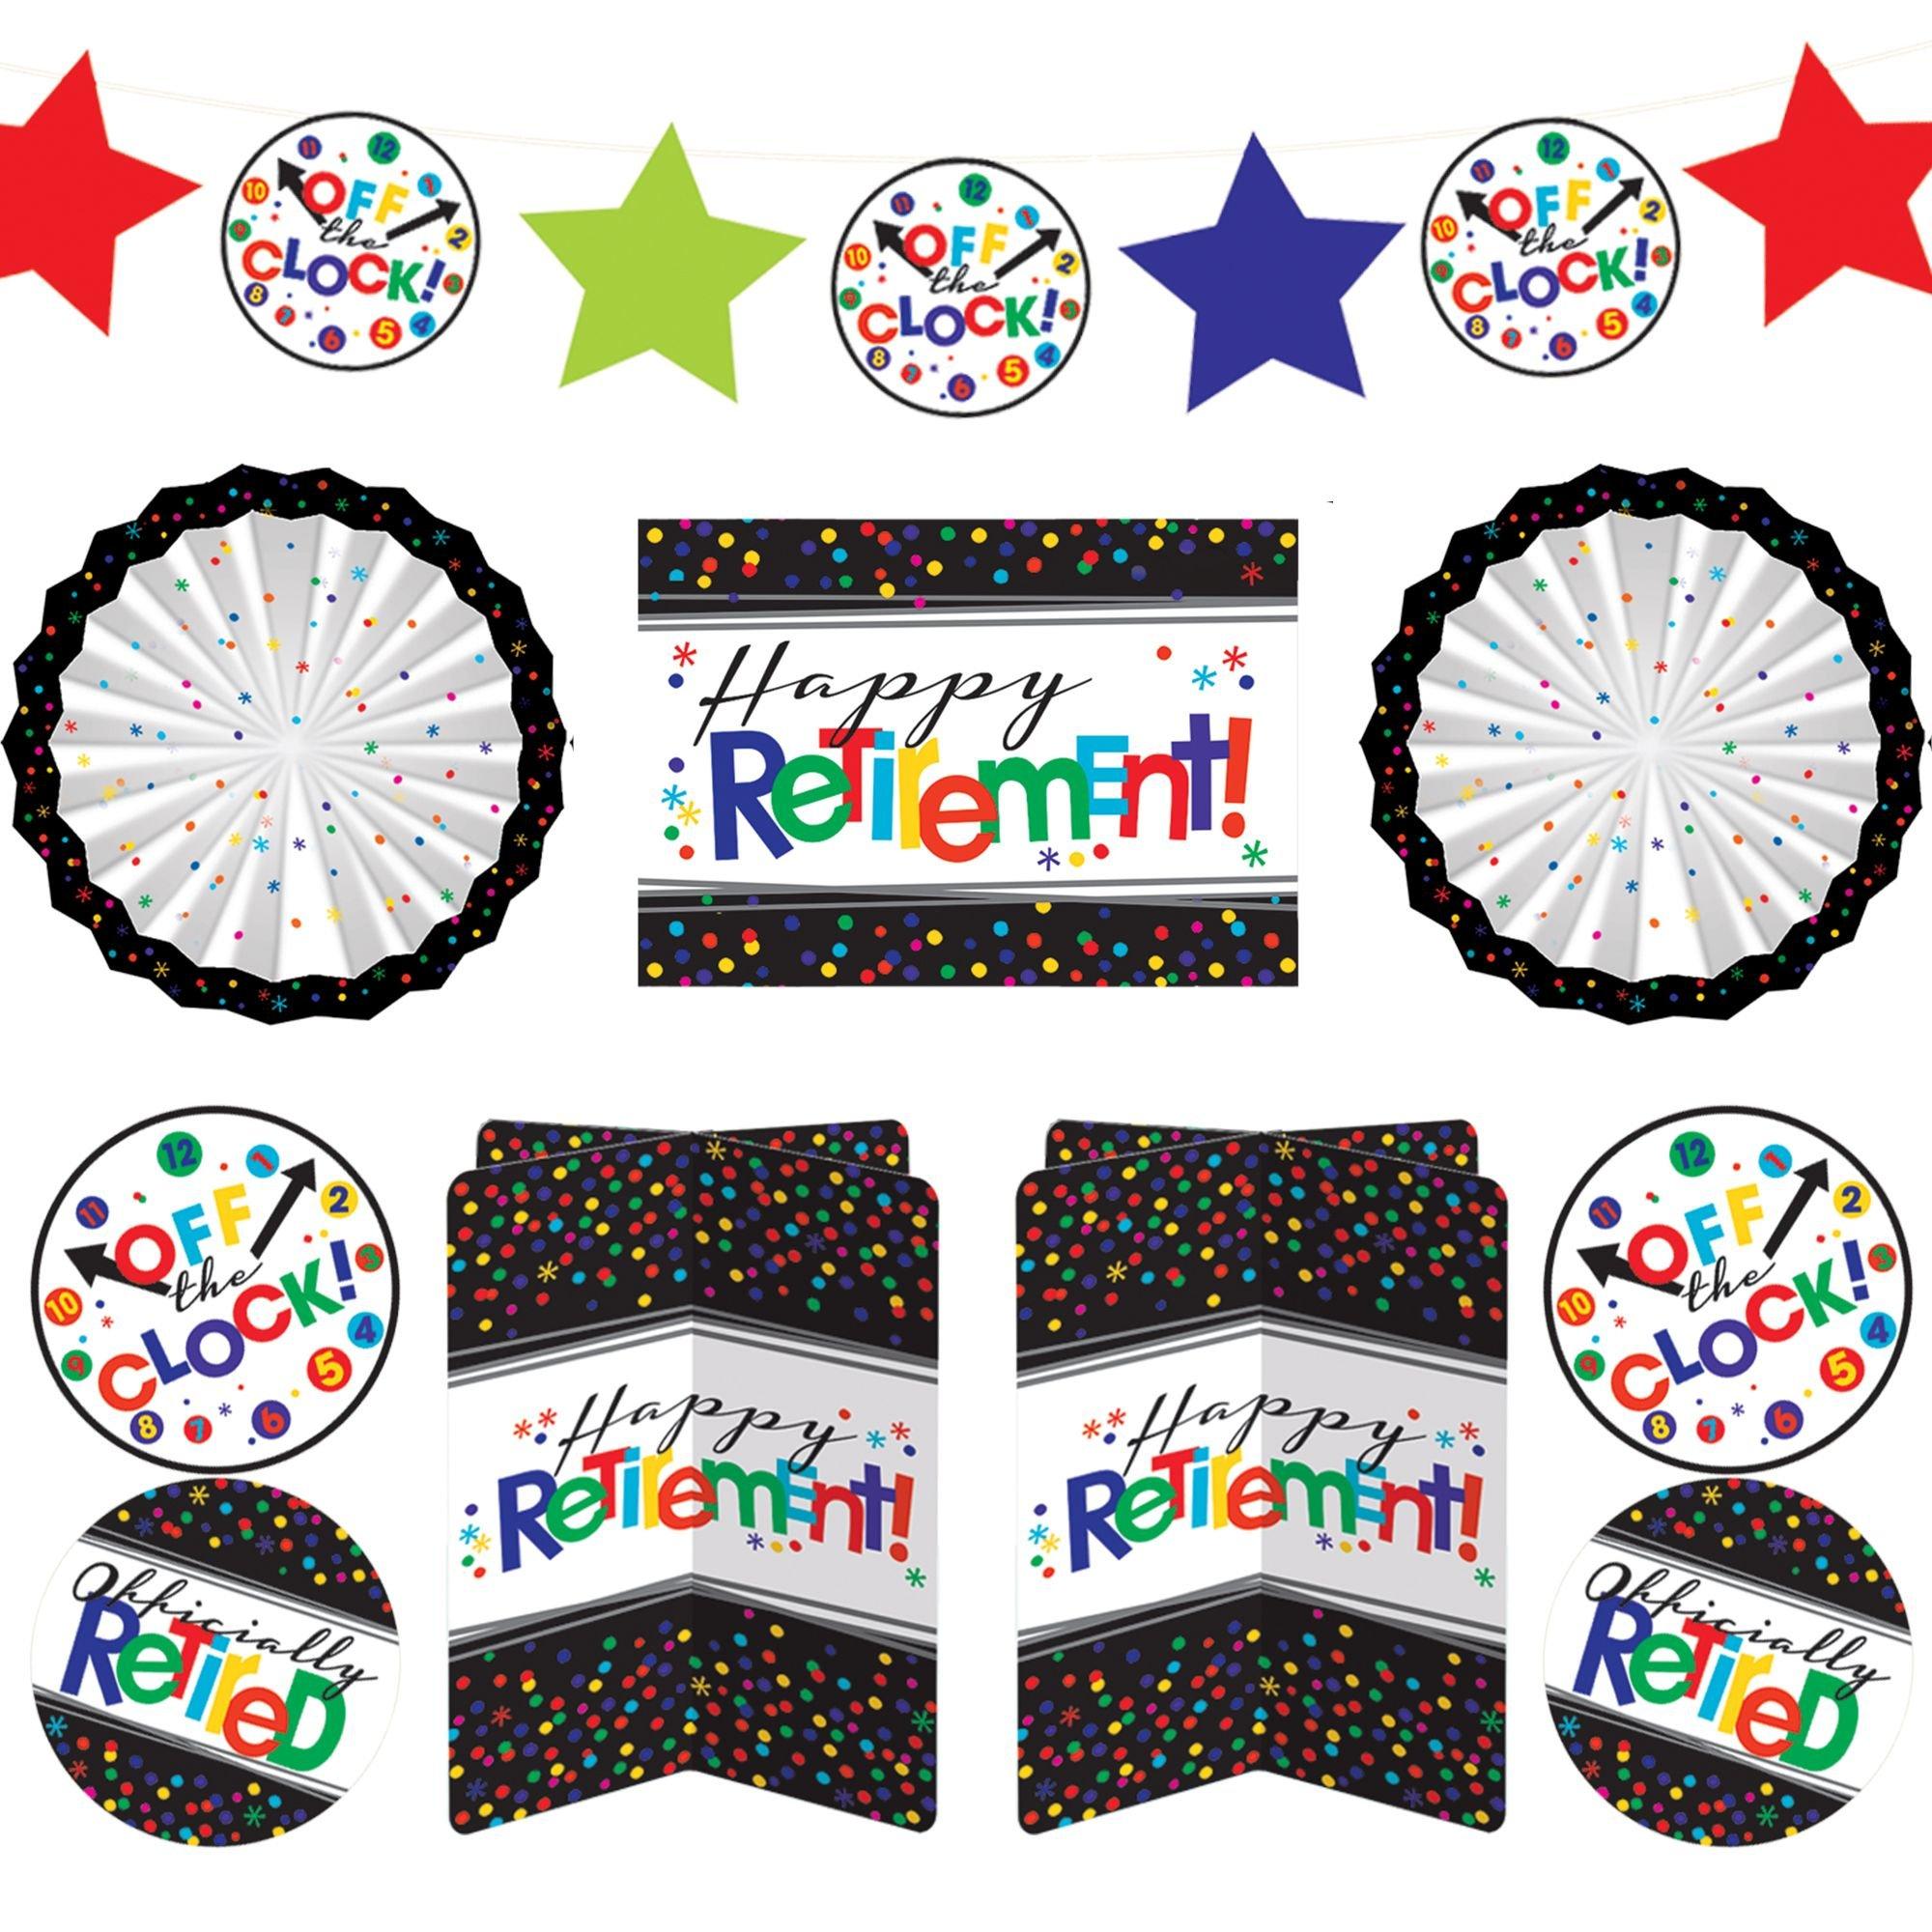 Officially Retired Room Decorating Kit, 10pc